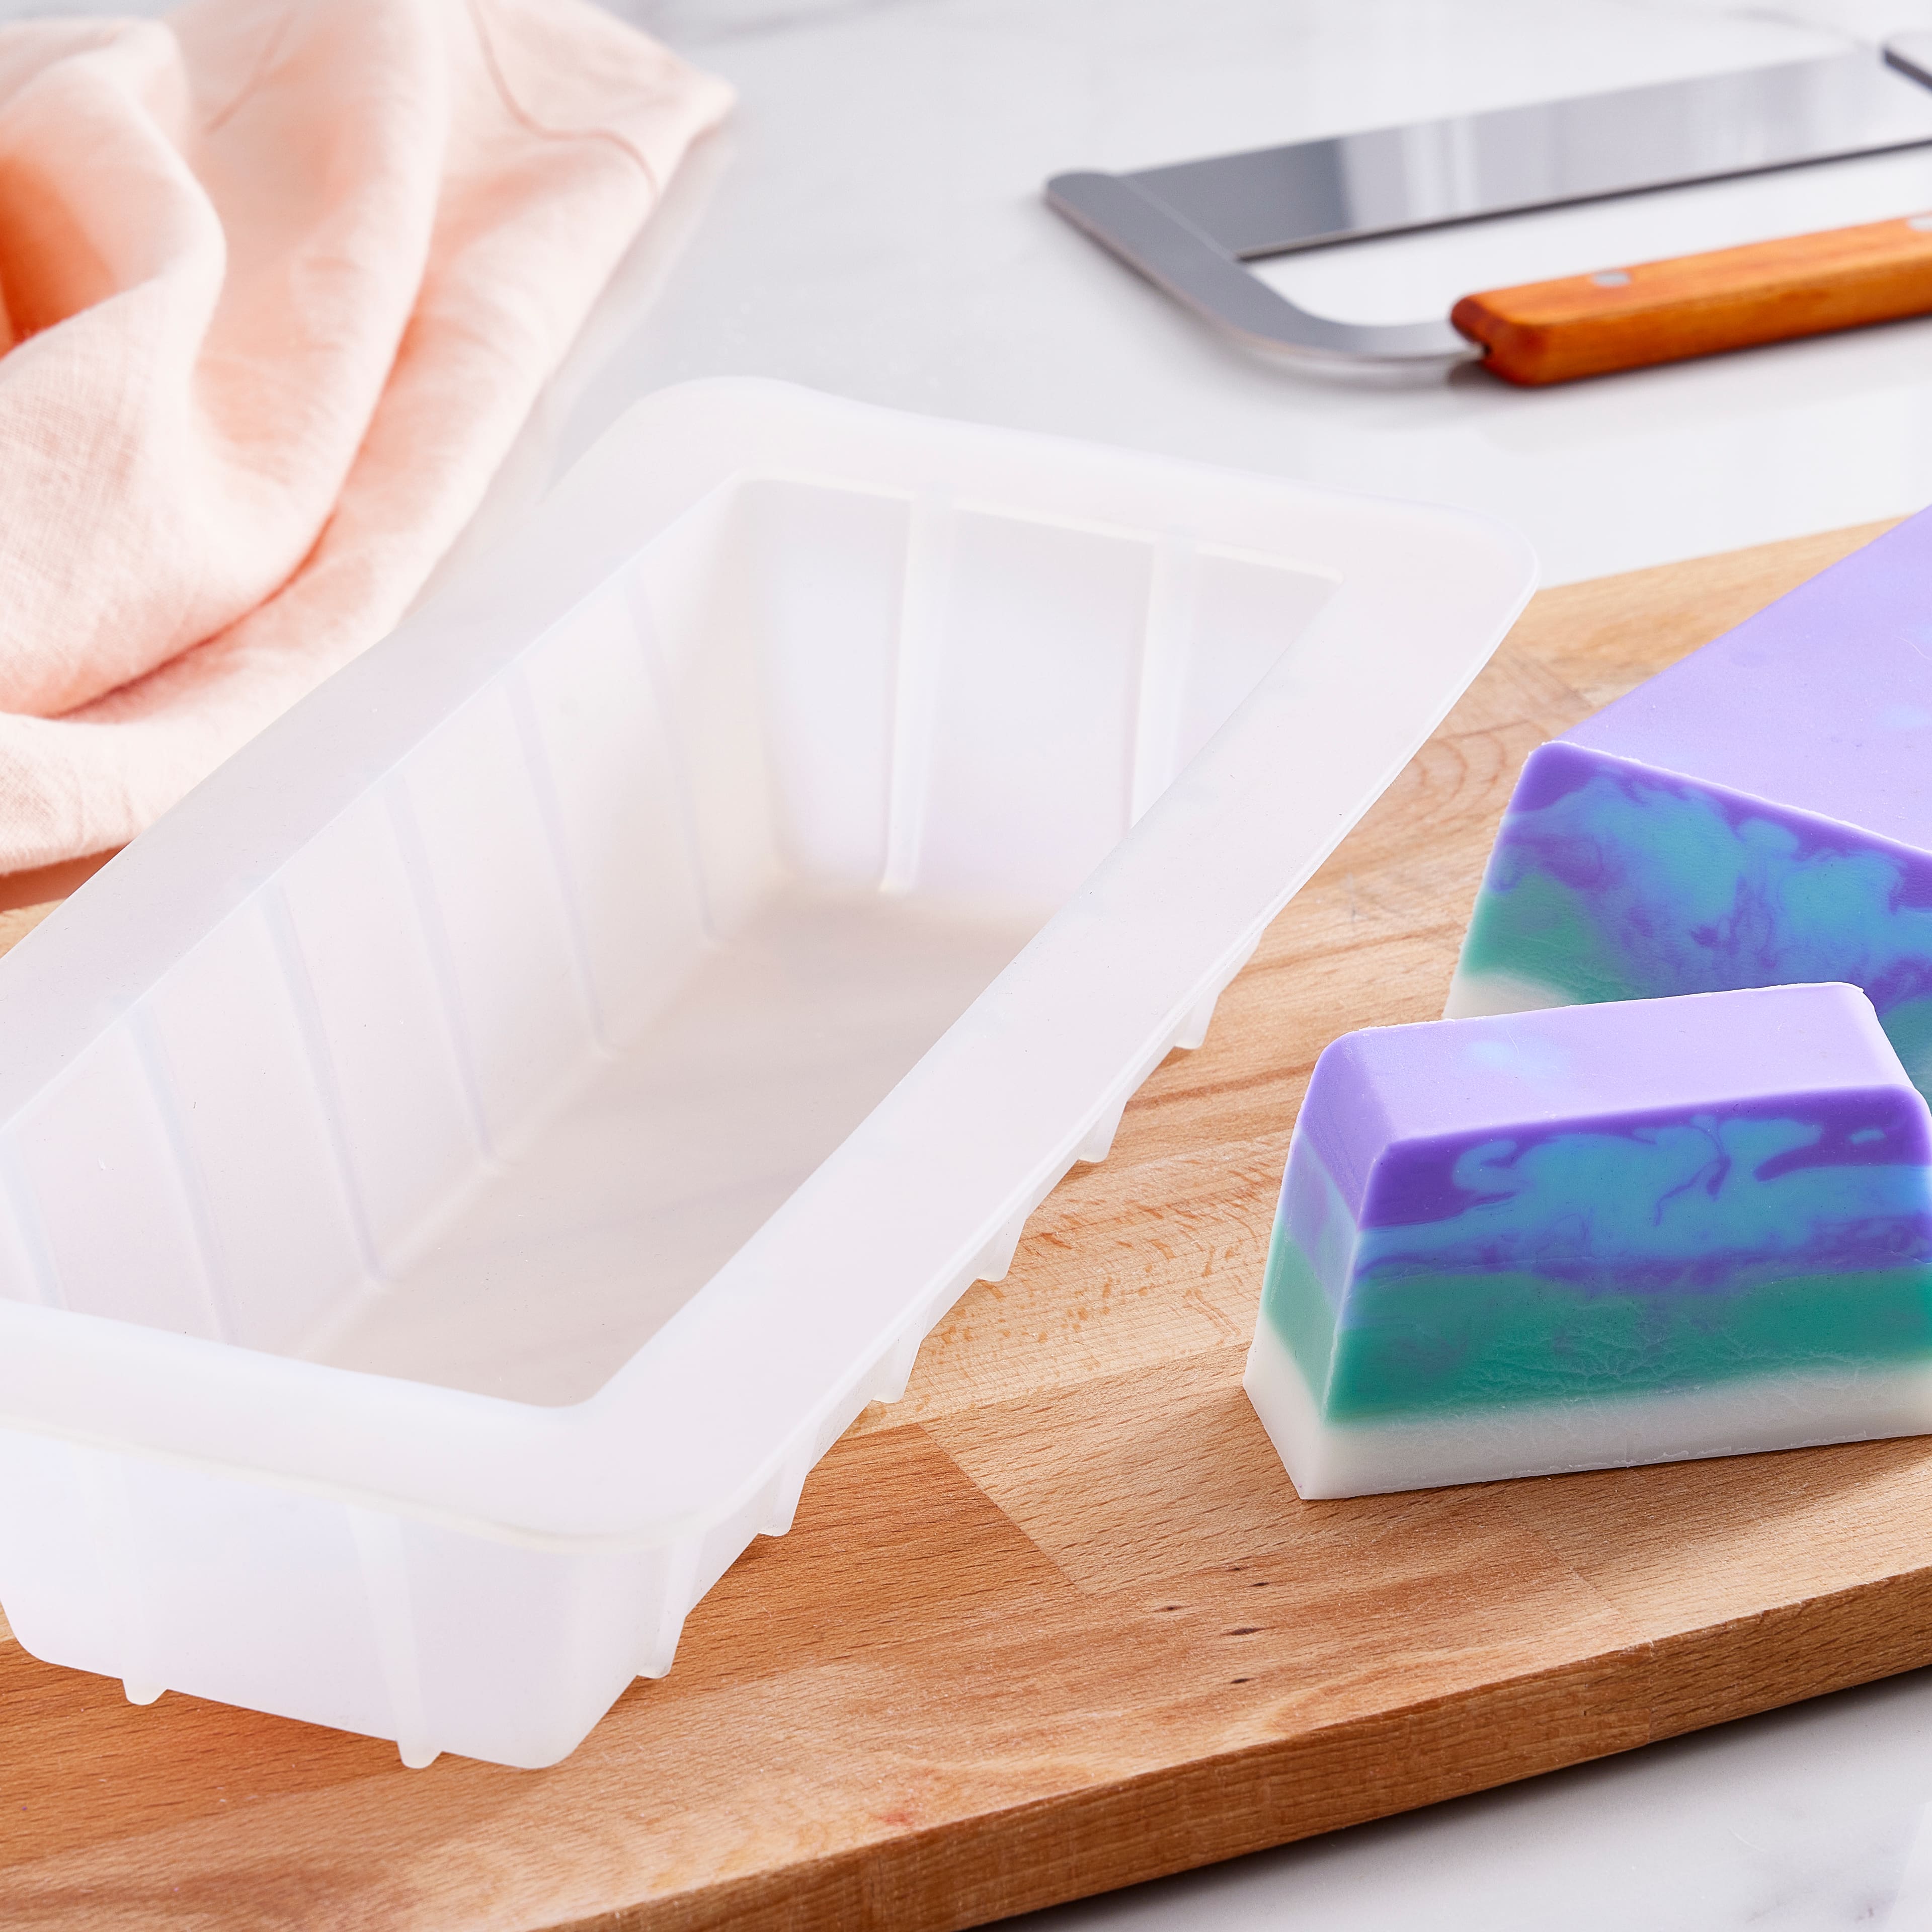 Silicone Loaf Soap Mold by Make Market&#xAE;